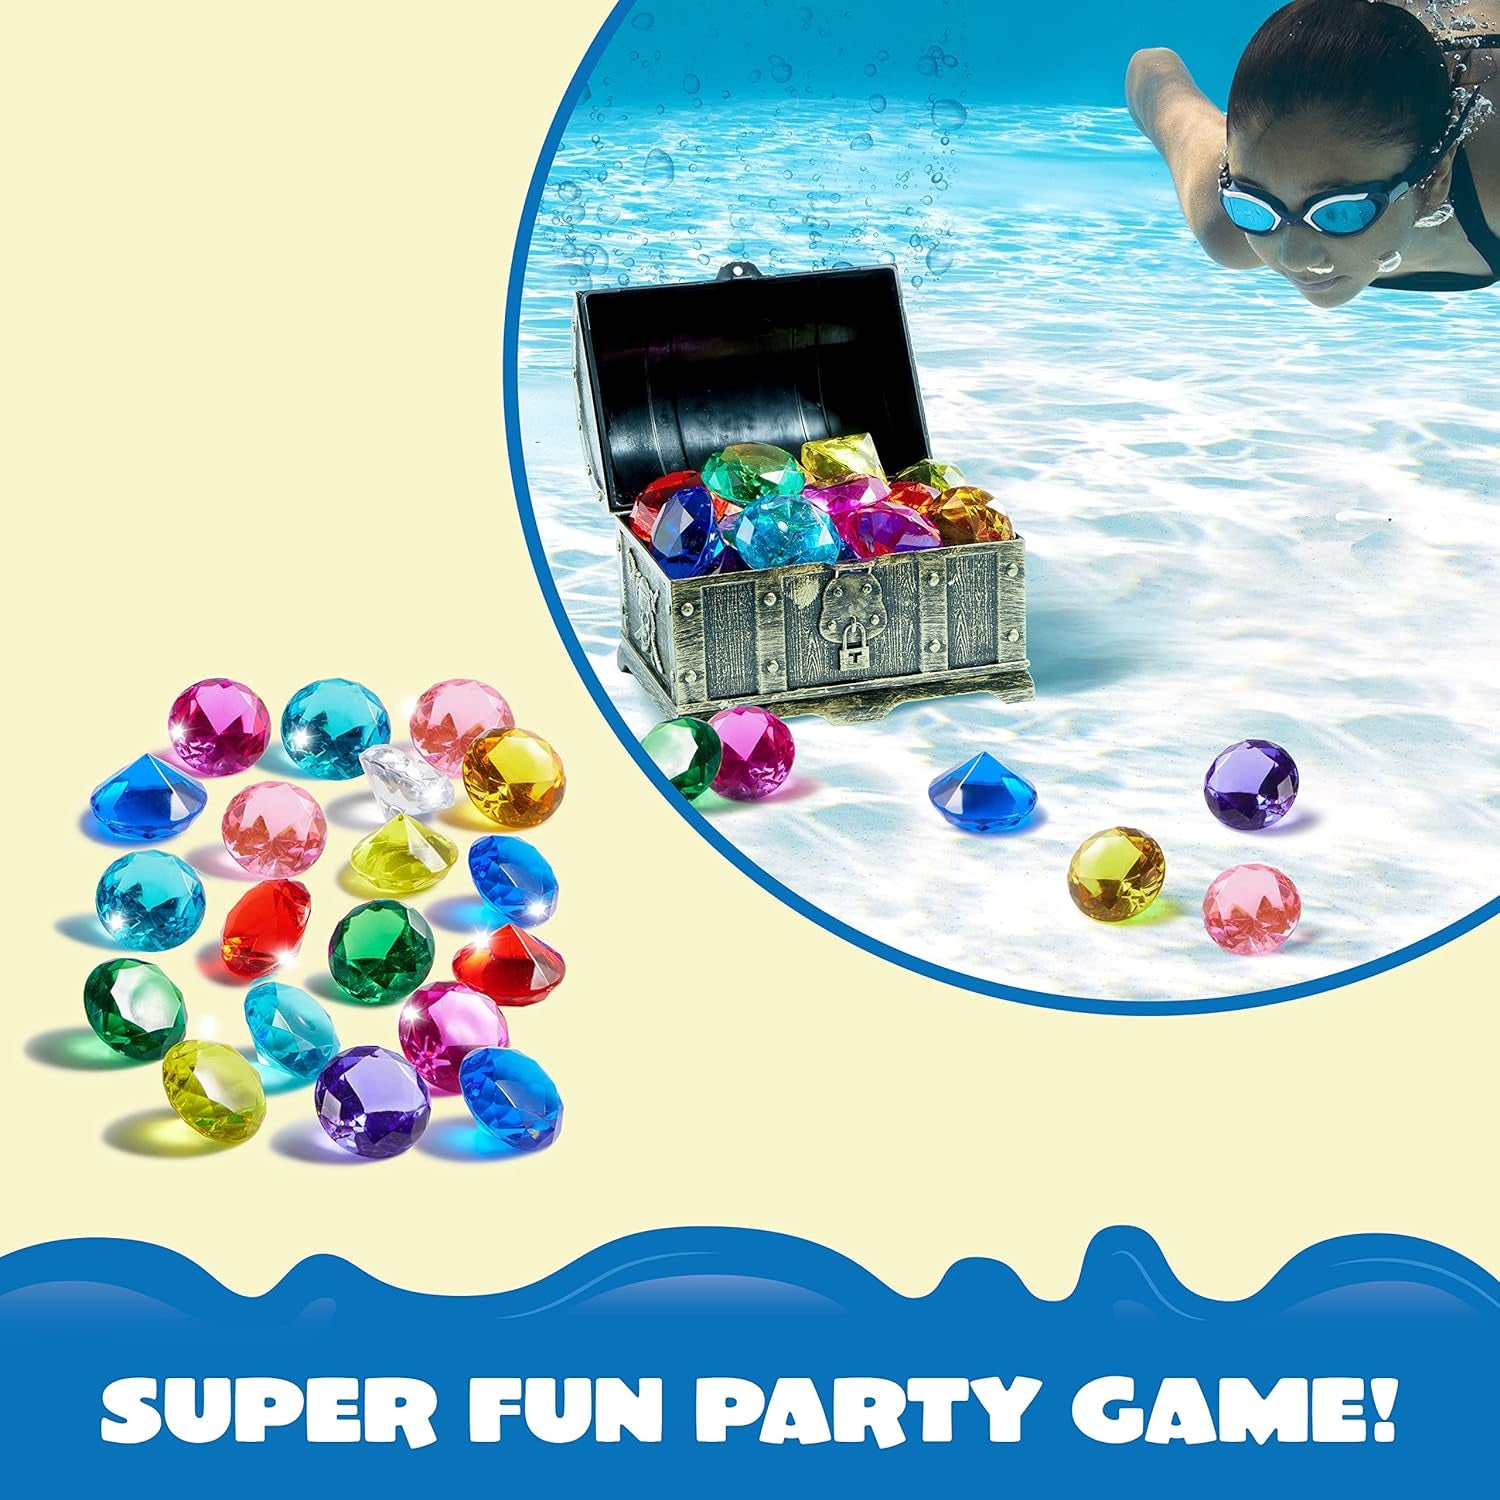 Diving Gems Pool Toys, 16 Big Colorful Diamond with Pirate Treasure Chest, Swim Dive Toy for Kids Underwater Gemstone Swimming Training Gift Water Toys Pool Games（Gold）